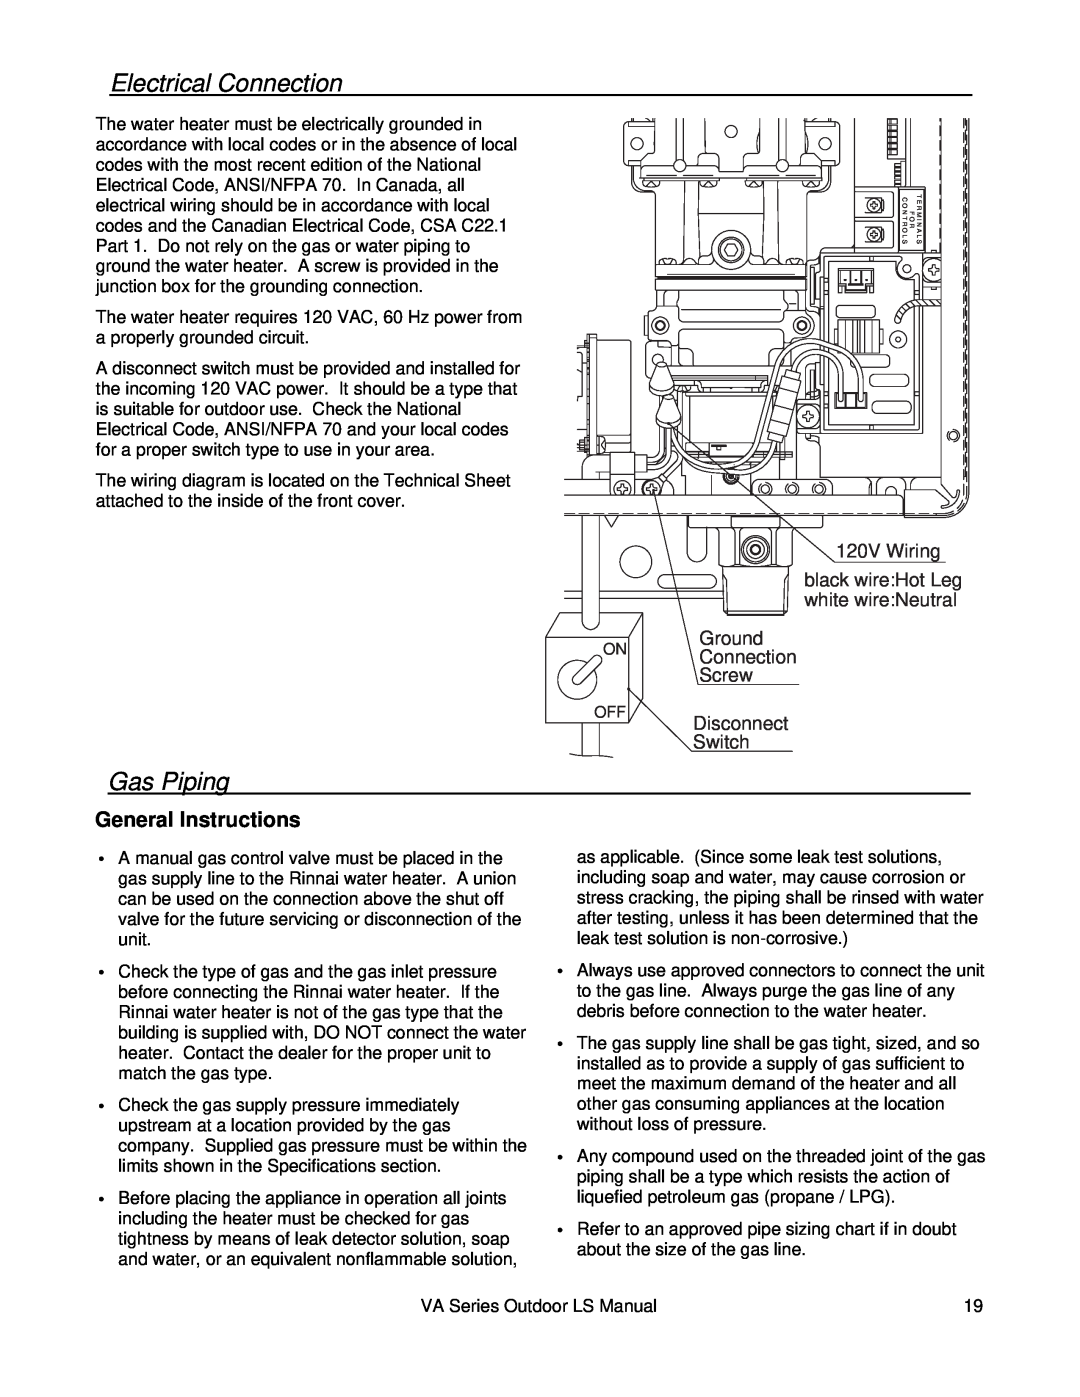 Rinnai R98LSE-ASME Electrical Connection, Gas Piping, General Instructions, Ground ON Connection Screw, Disconnect Switch 